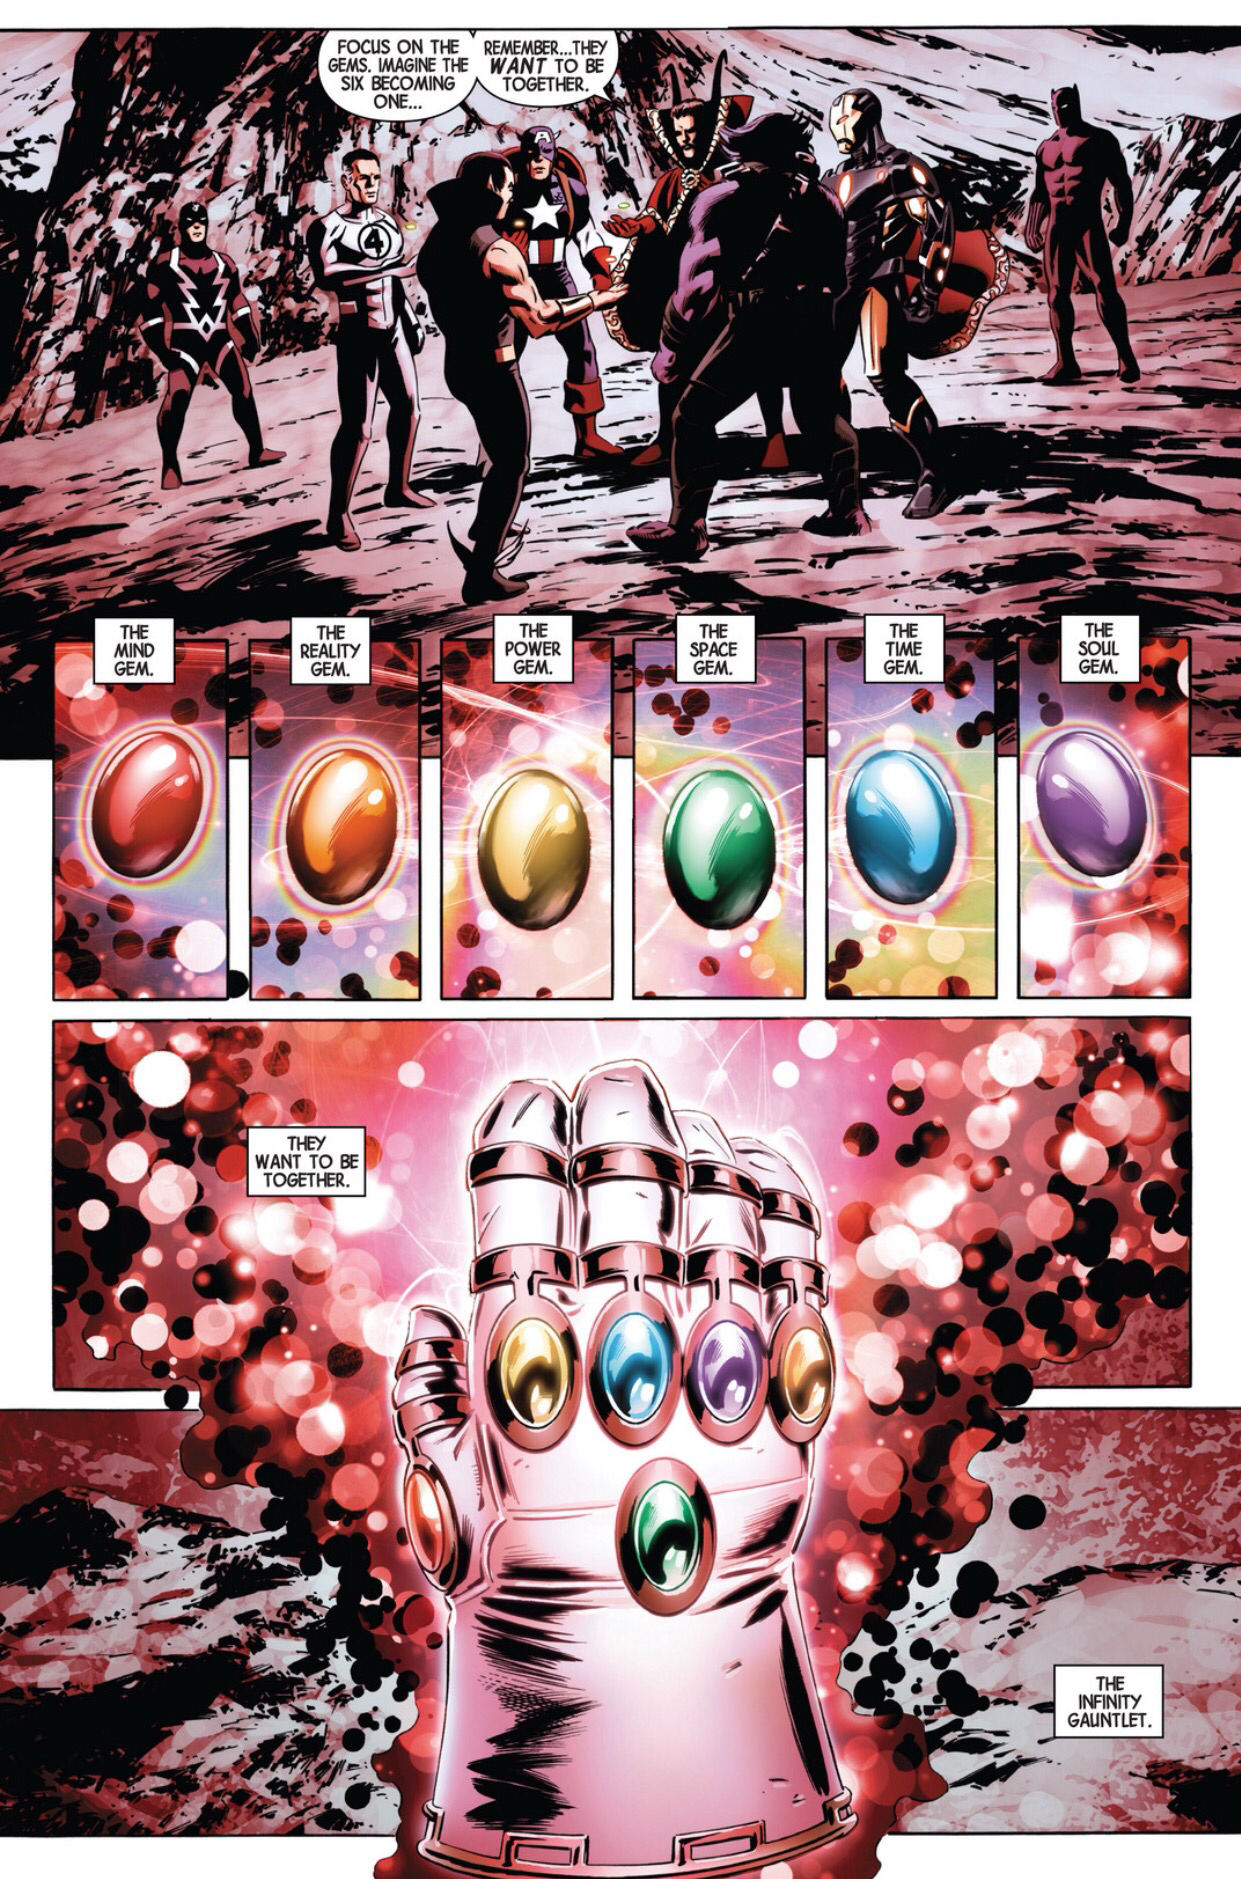 Captain America uses the infinity guantlet